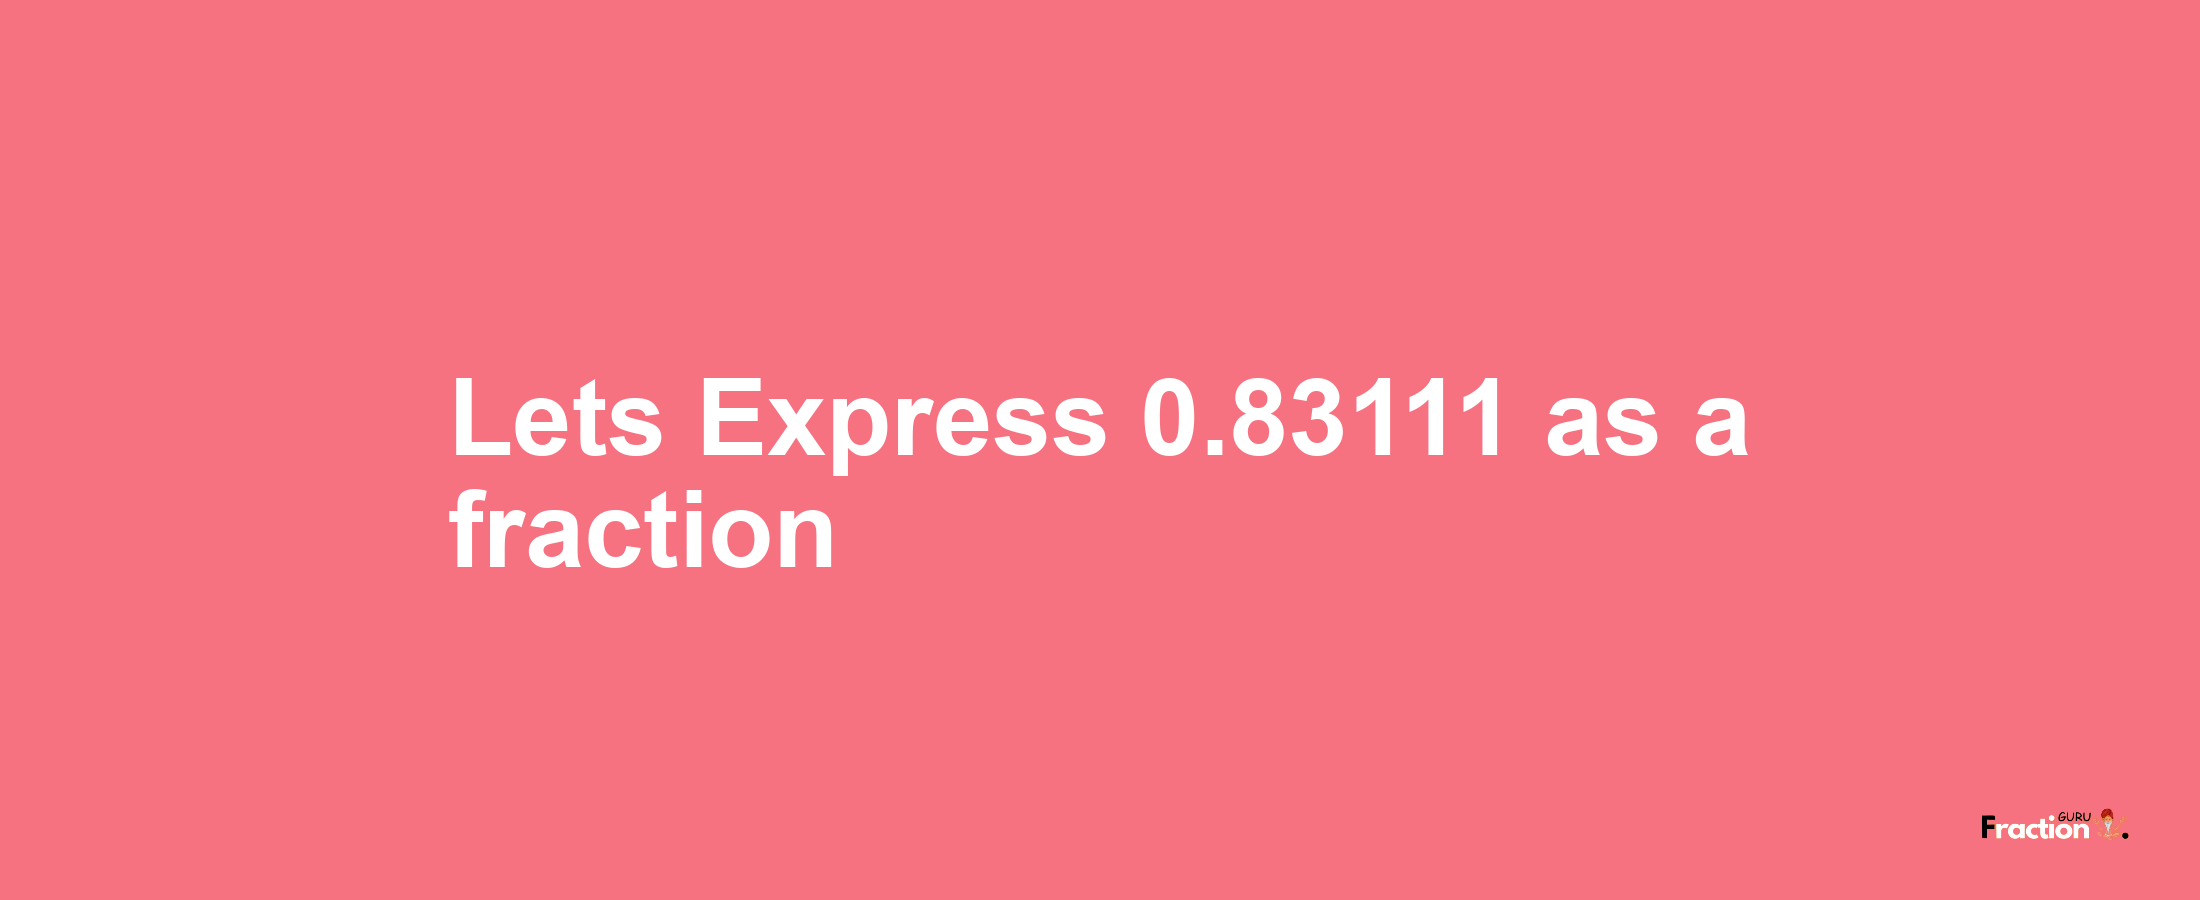 Lets Express 0.83111 as afraction